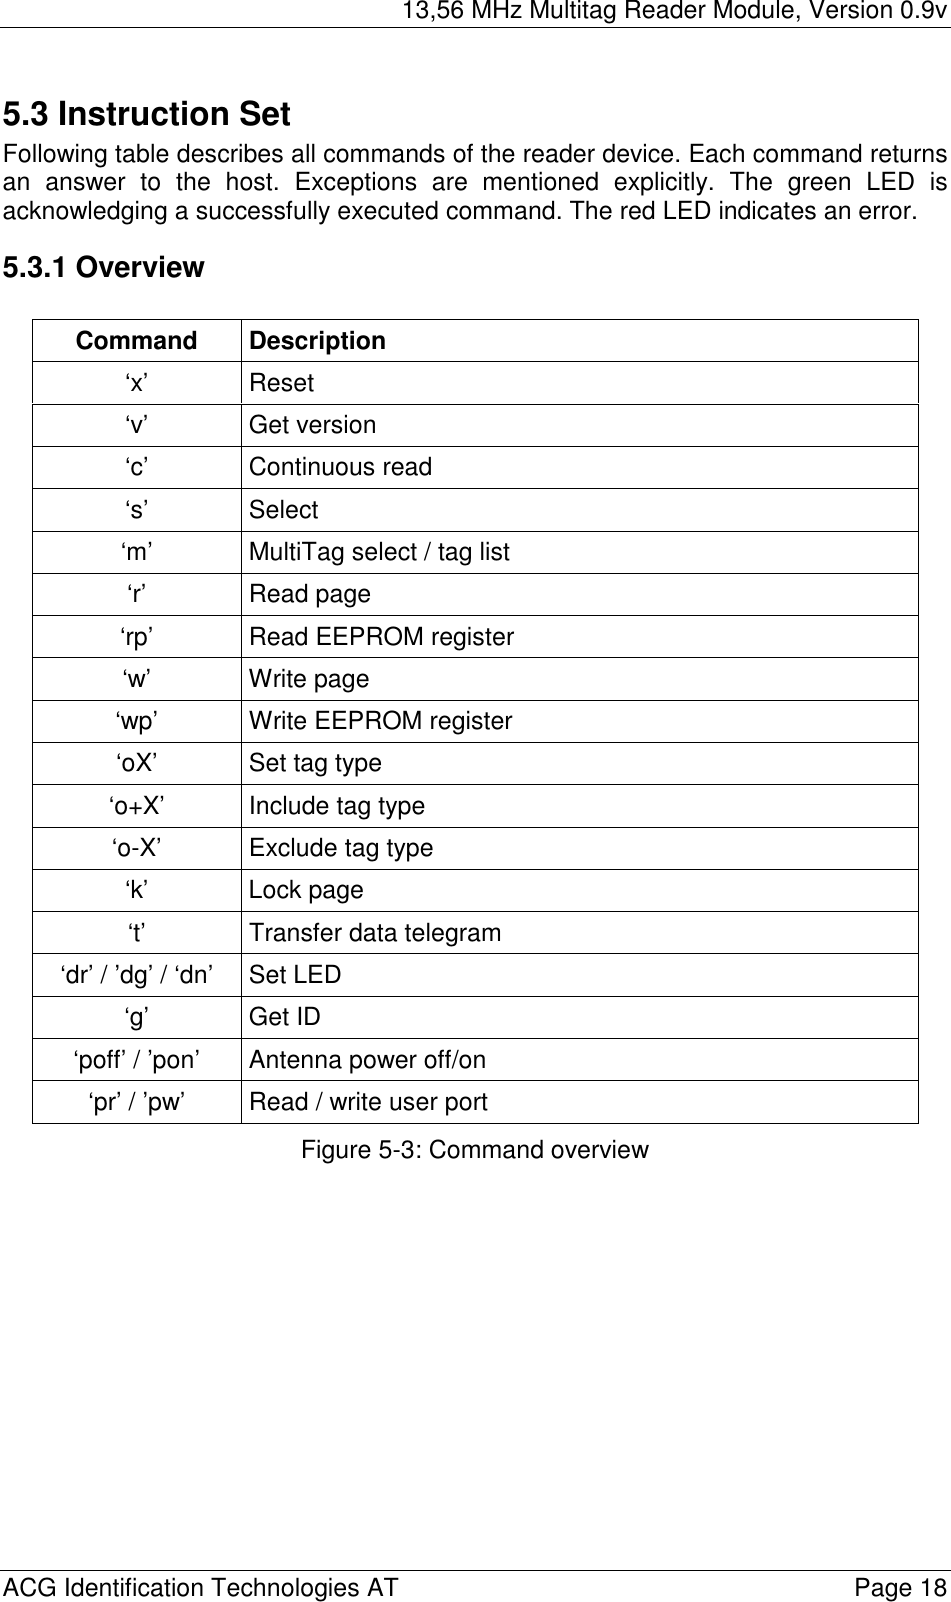 13,56 MHz Multitag Reader Module, Version 0.9v  ACG Identification Technologies AT    Page 18 5.3 Instruction Set  Following table describes all commands of the reader device. Each command returns an answer to the host. Exceptions are mentioned explicitly. The green LED is acknowledging a successfully executed command. The red LED indicates an error. 5.3.1 Overview  Command Description ‘x’ Reset ‘v’ Get version ‘c’ Continuous read ‘s’ Select ‘m’  MultiTag select / tag list ‘r’ Read page ‘rp’  Read EEPROM register ‘w’ Write page ‘wp’  Write EEPROM register ‘oX’  Set tag type ‘o+X’  Include tag type ‘o-X’  Exclude tag type  ‘k’ Lock page ‘t’ Transfer data telegram ‘dr’ / ’dg’ / ‘dn’  Set LED ‘g’  Get ID  ‘poff’ / ’pon’  Antenna power off/on ‘pr’ / ’pw’  Read / write user port Figure 5-3: Command overview  